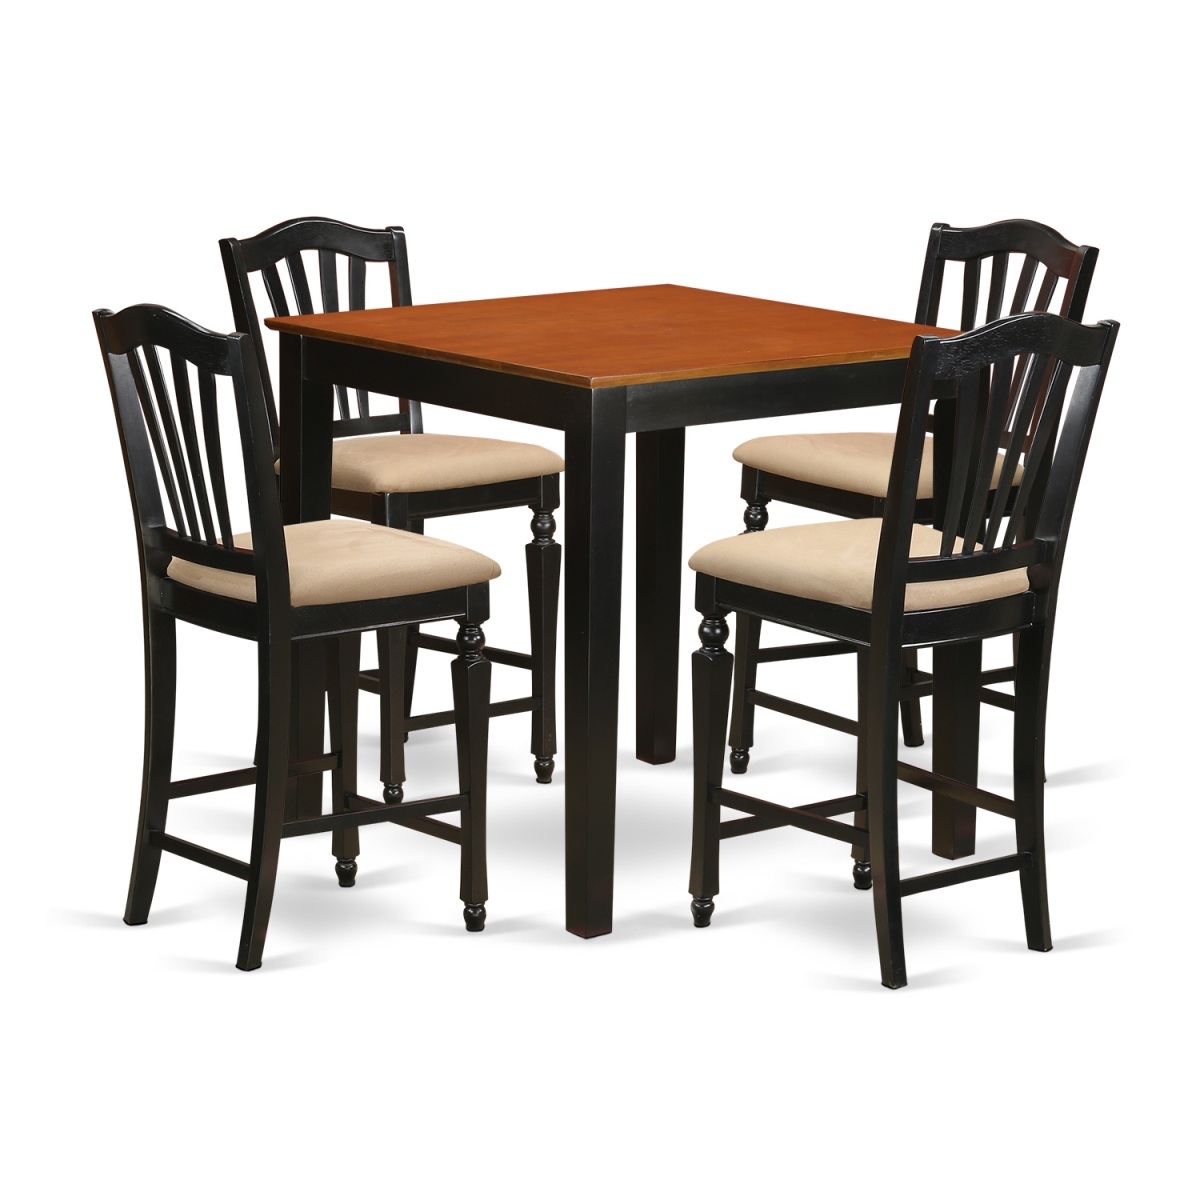 Counter Height Pub Table & 4 Kitchen Chairs, Warm Black